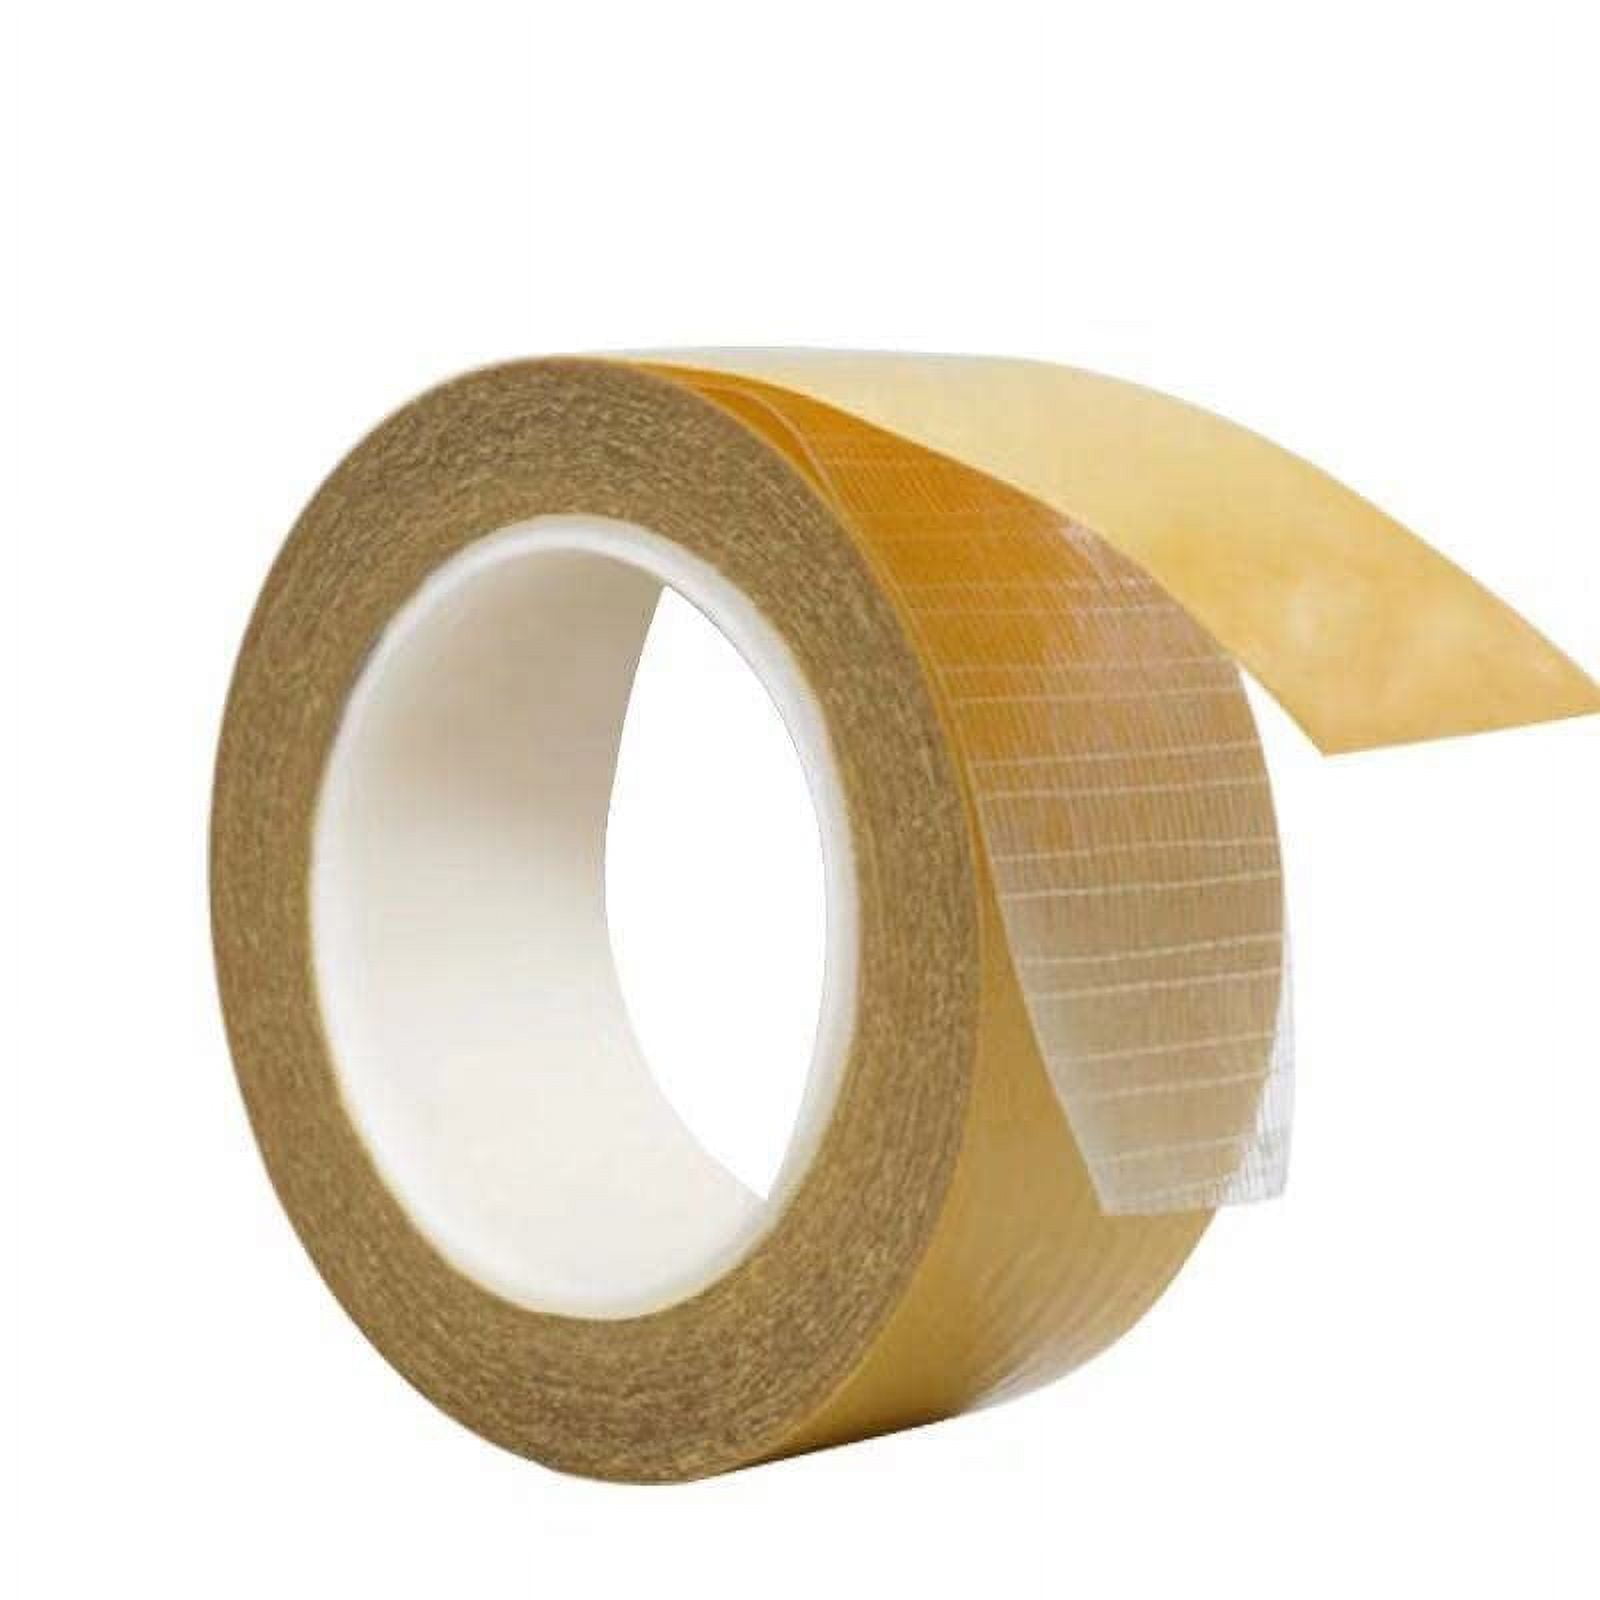 High Adhesive Strength Mesh Double-Sided Duct Tape, Carpet Tape Double  Sided, Easily Removable with No Residue, Keeps Rugs in Place on Hardwood  Tile